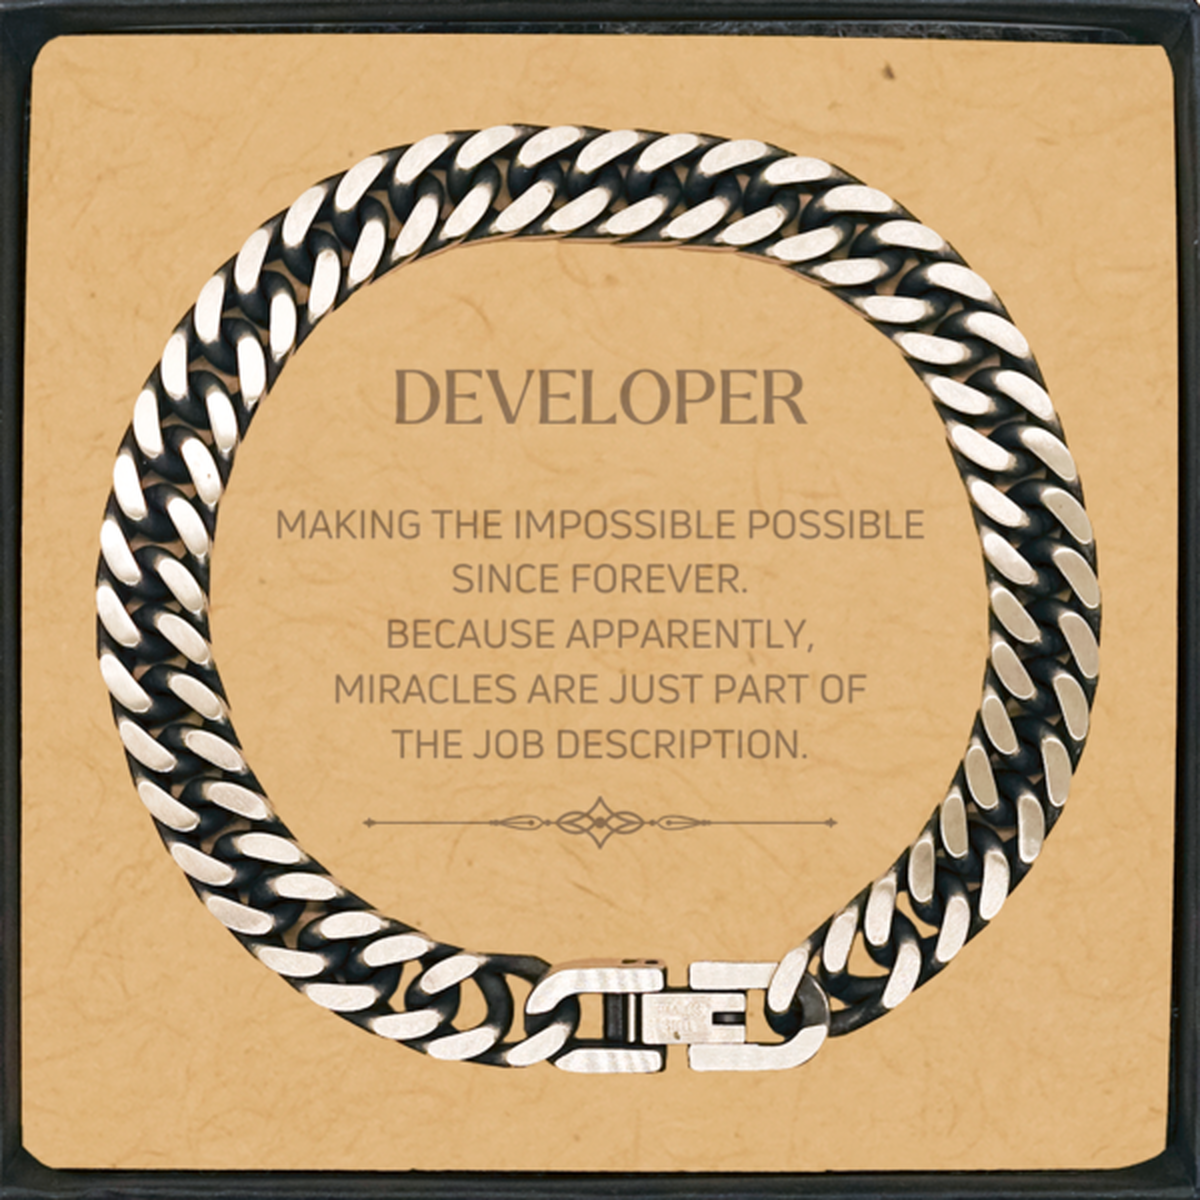 Funny Developer Gifts, Miracles are just part of the job description, Inspirational Birthday Cuban Link Chain Bracelet For Developer, Men, Women, Coworkers, Friends, Boss